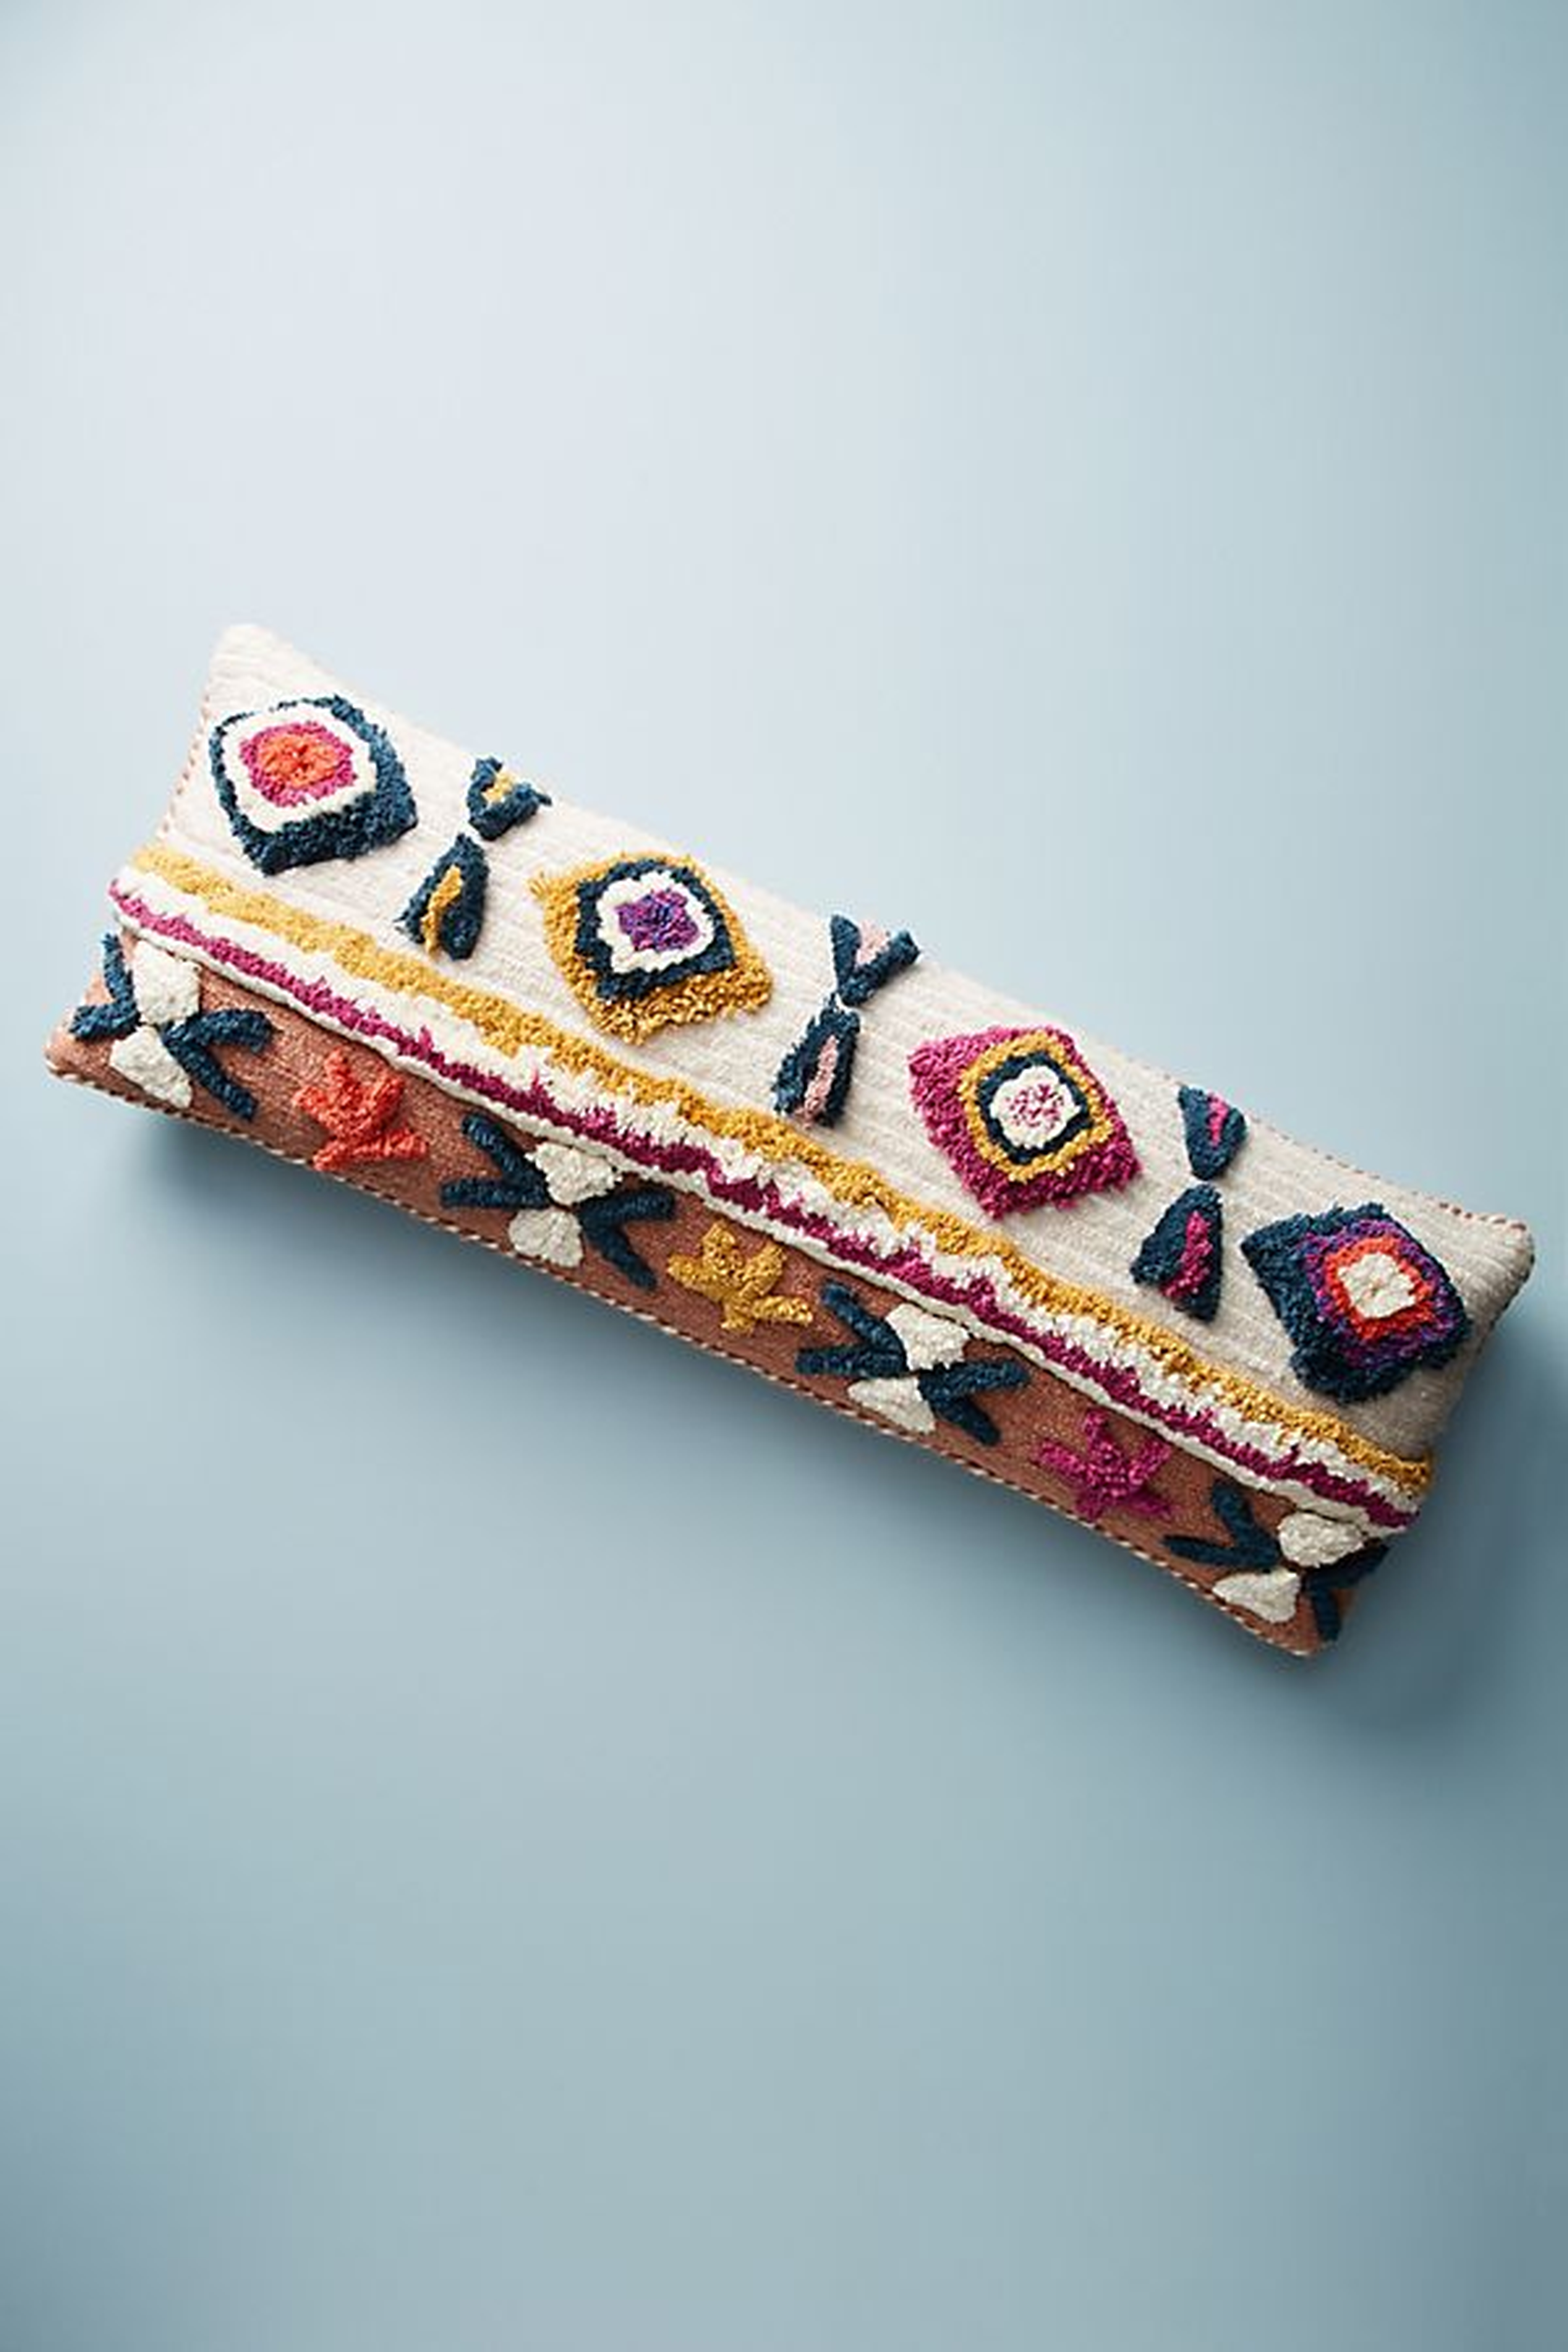 Tufted Ayla Pillow - Anthropologie